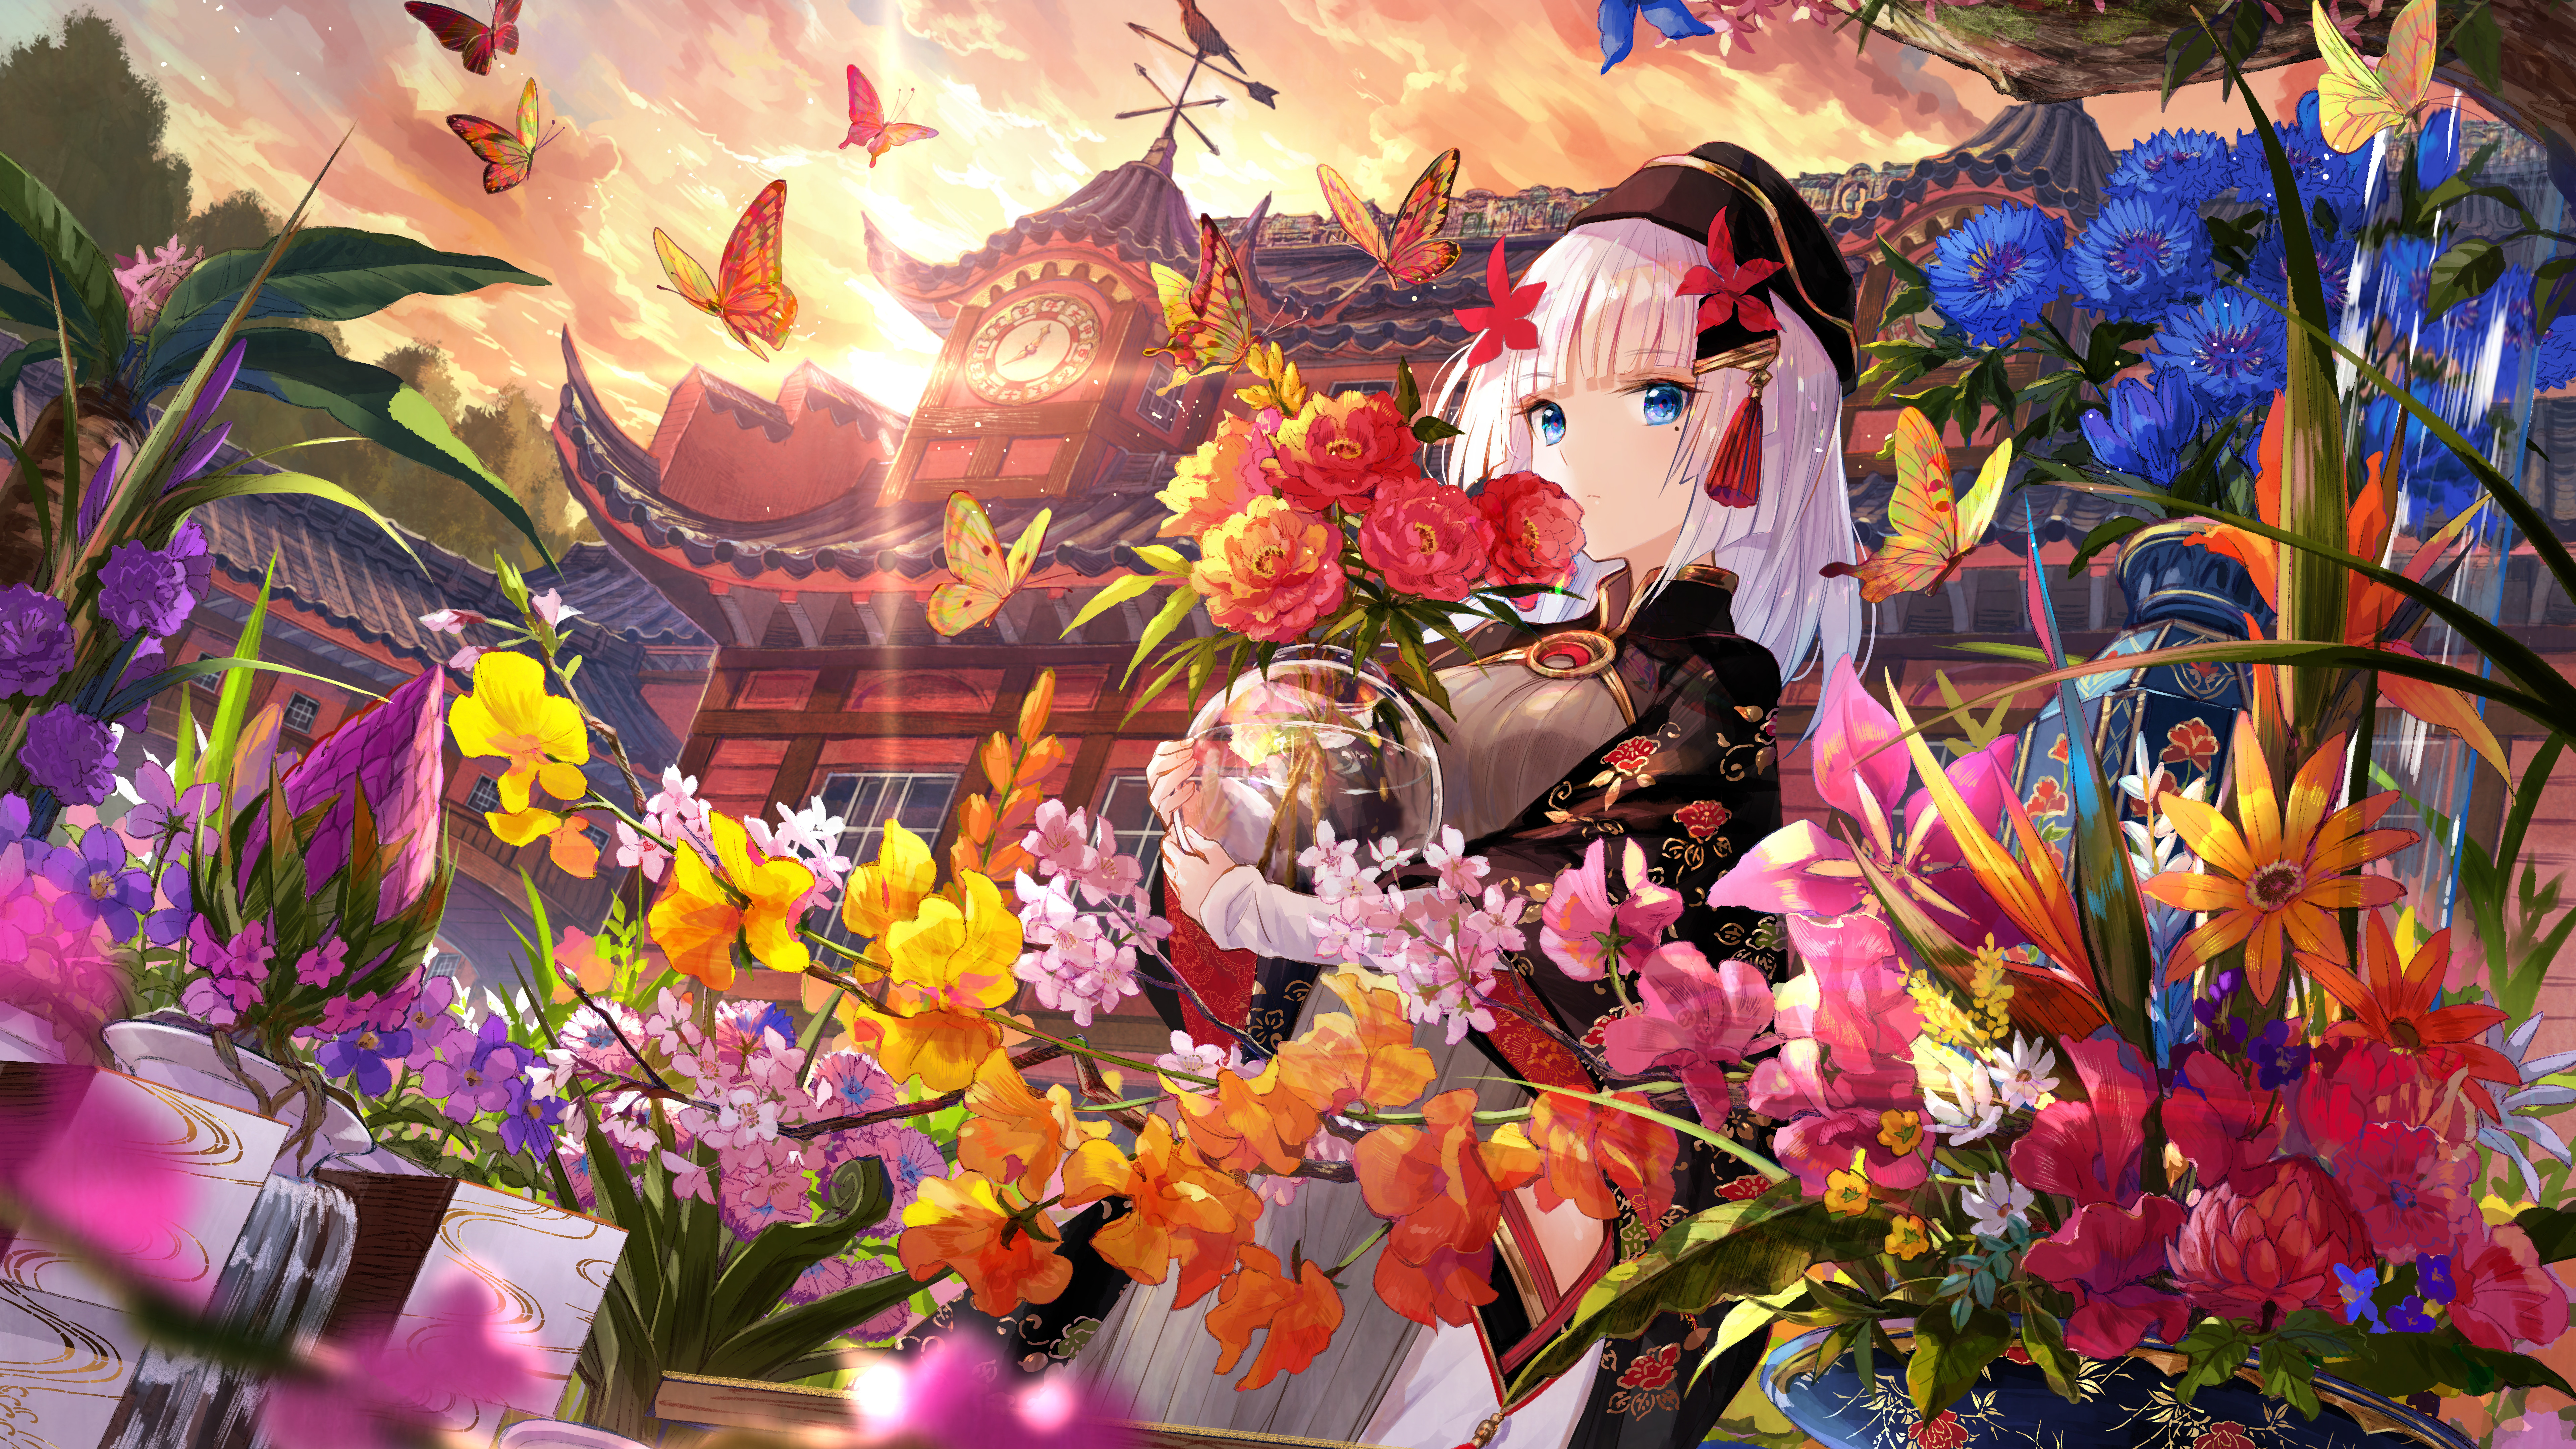 Beautiful Anime Flower Wallpapers